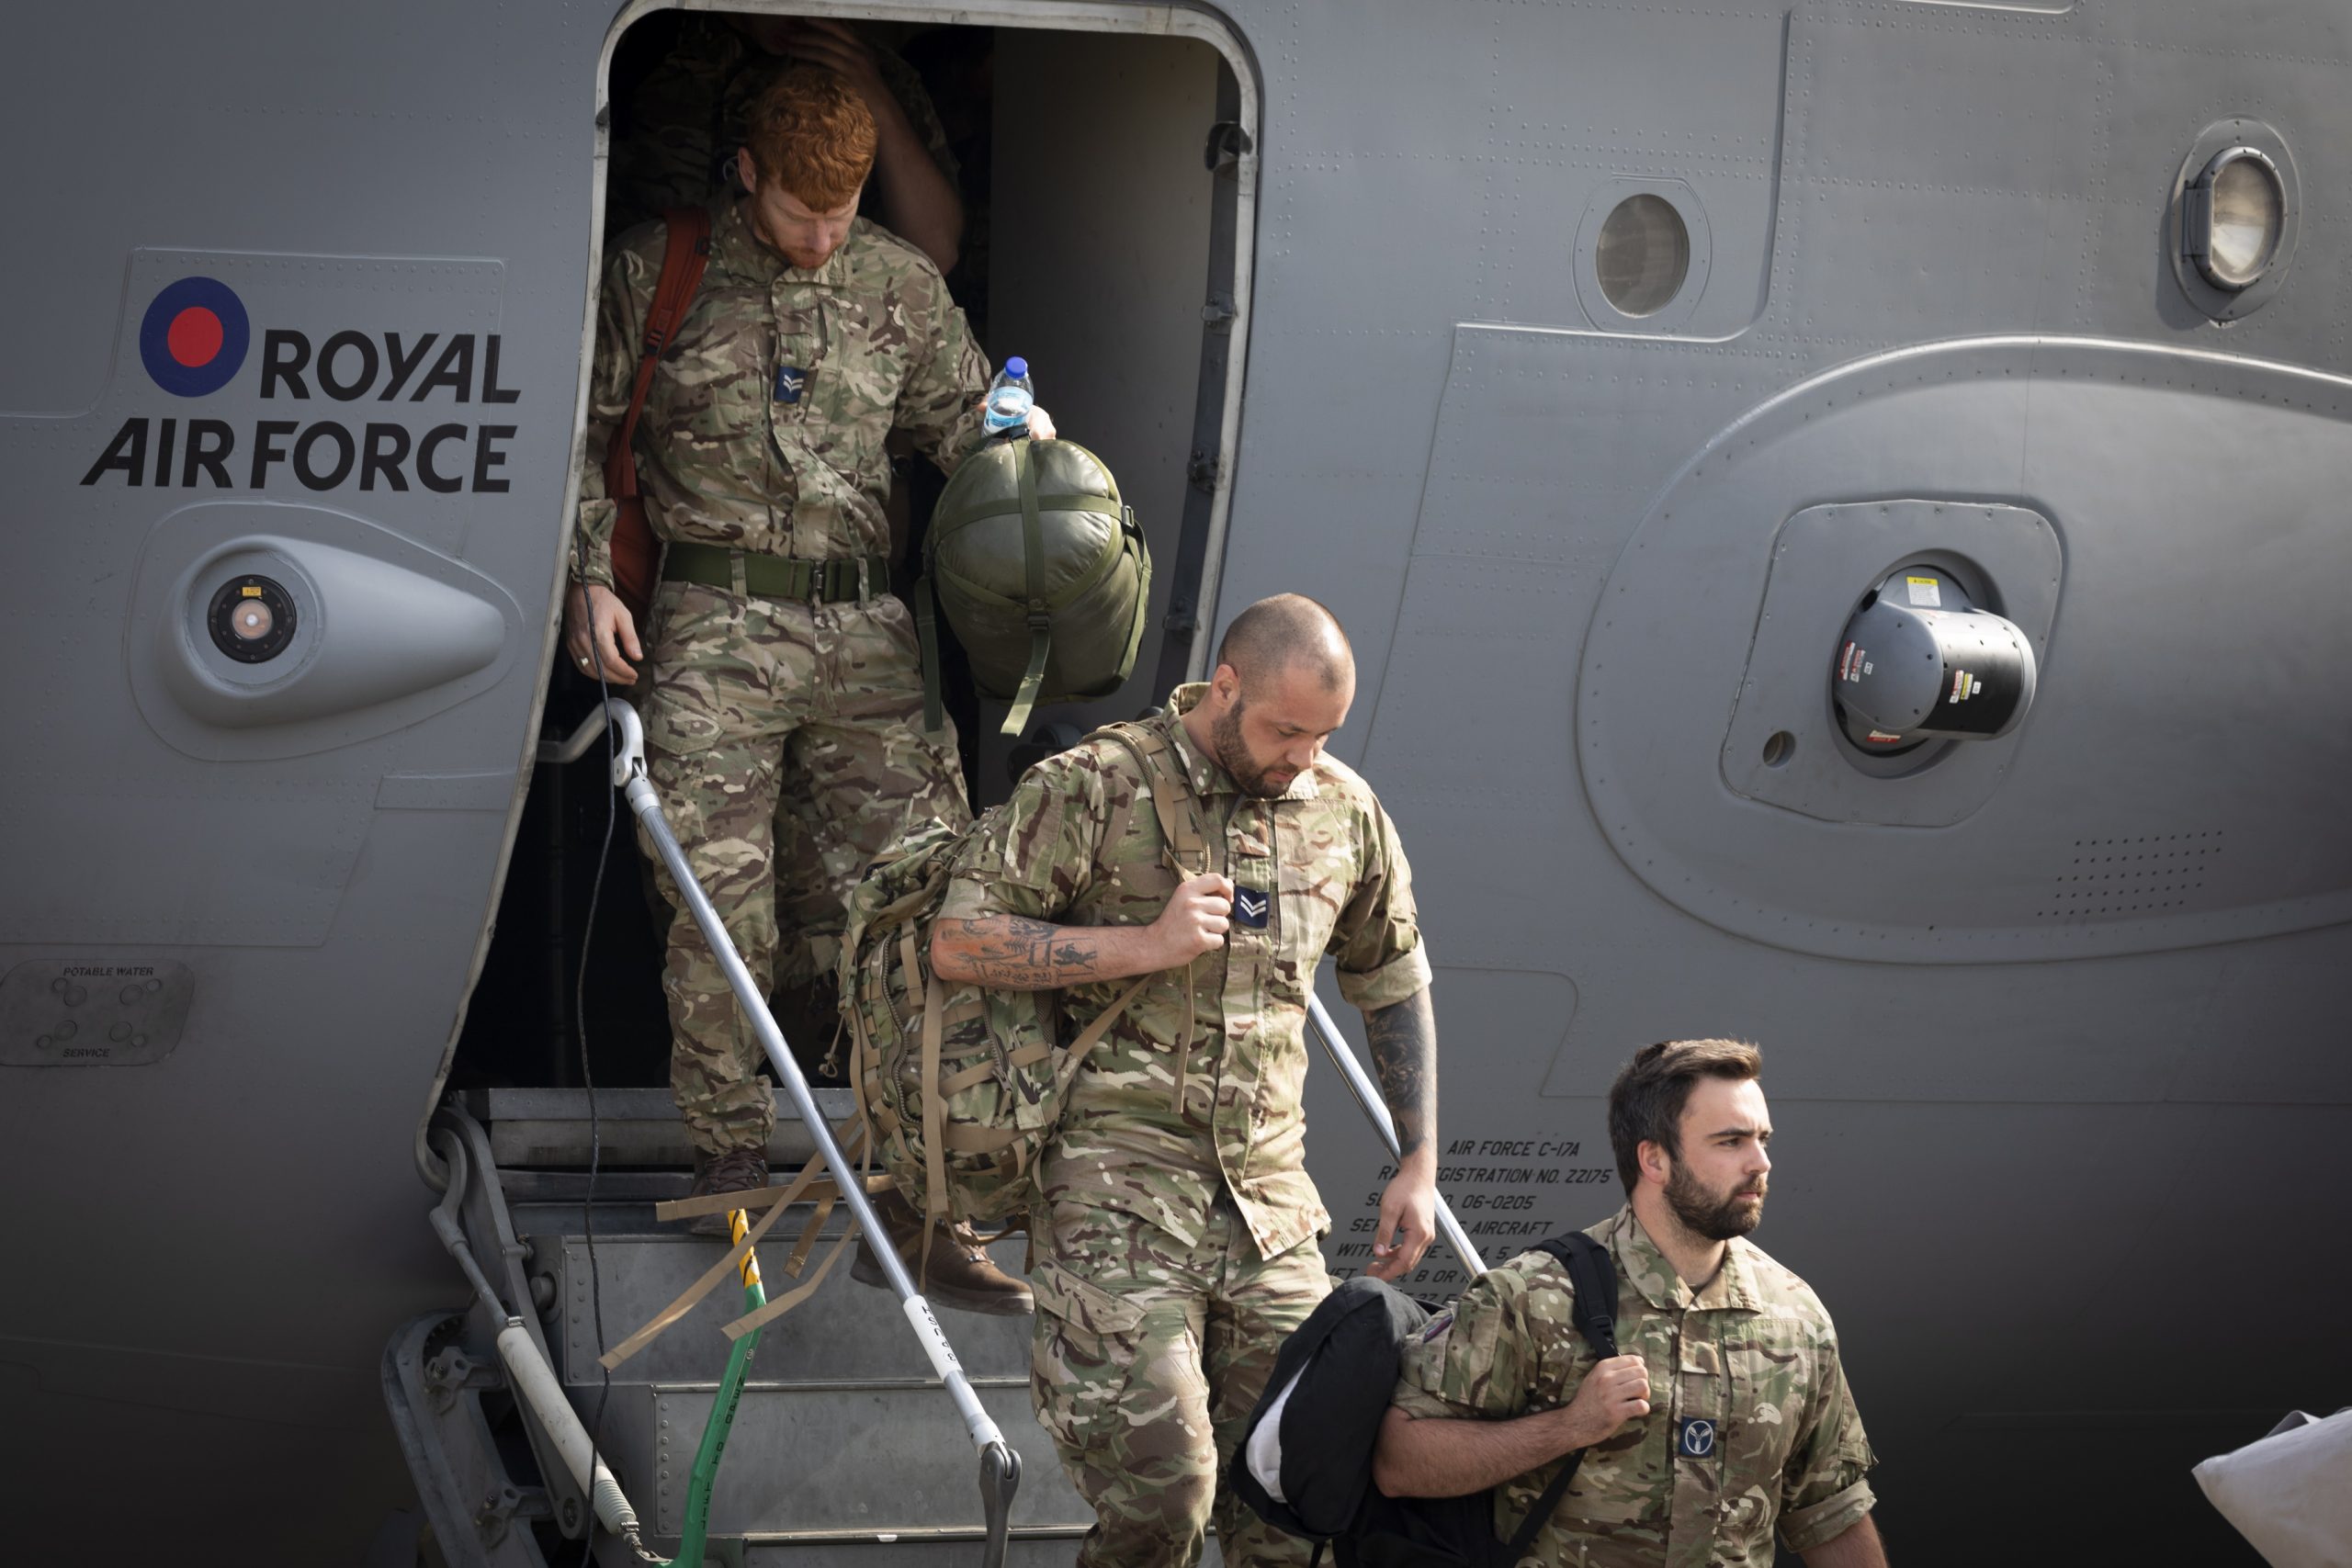 epa09435167 A handout picture provided by the British Royal Air Force shows British military personnel returning to RAF Brize Norton, 29 August 2021. According to the UK's Ministry of Defence, a military aircraft carrying military and MOD personnel and freight returned from Kabul on one of the final flights out of Afghanistan, as the UK’s military involvement in evacuations from Kabul ended.  EPA/Matthews RAF/BRITISH MINISTRY OF DEFENCE HANDOUT MANDATORY CREDIT: MOD/CROWN COPYRIGHT HANDOUT EDITORIAL USE ONLY/NO SALES